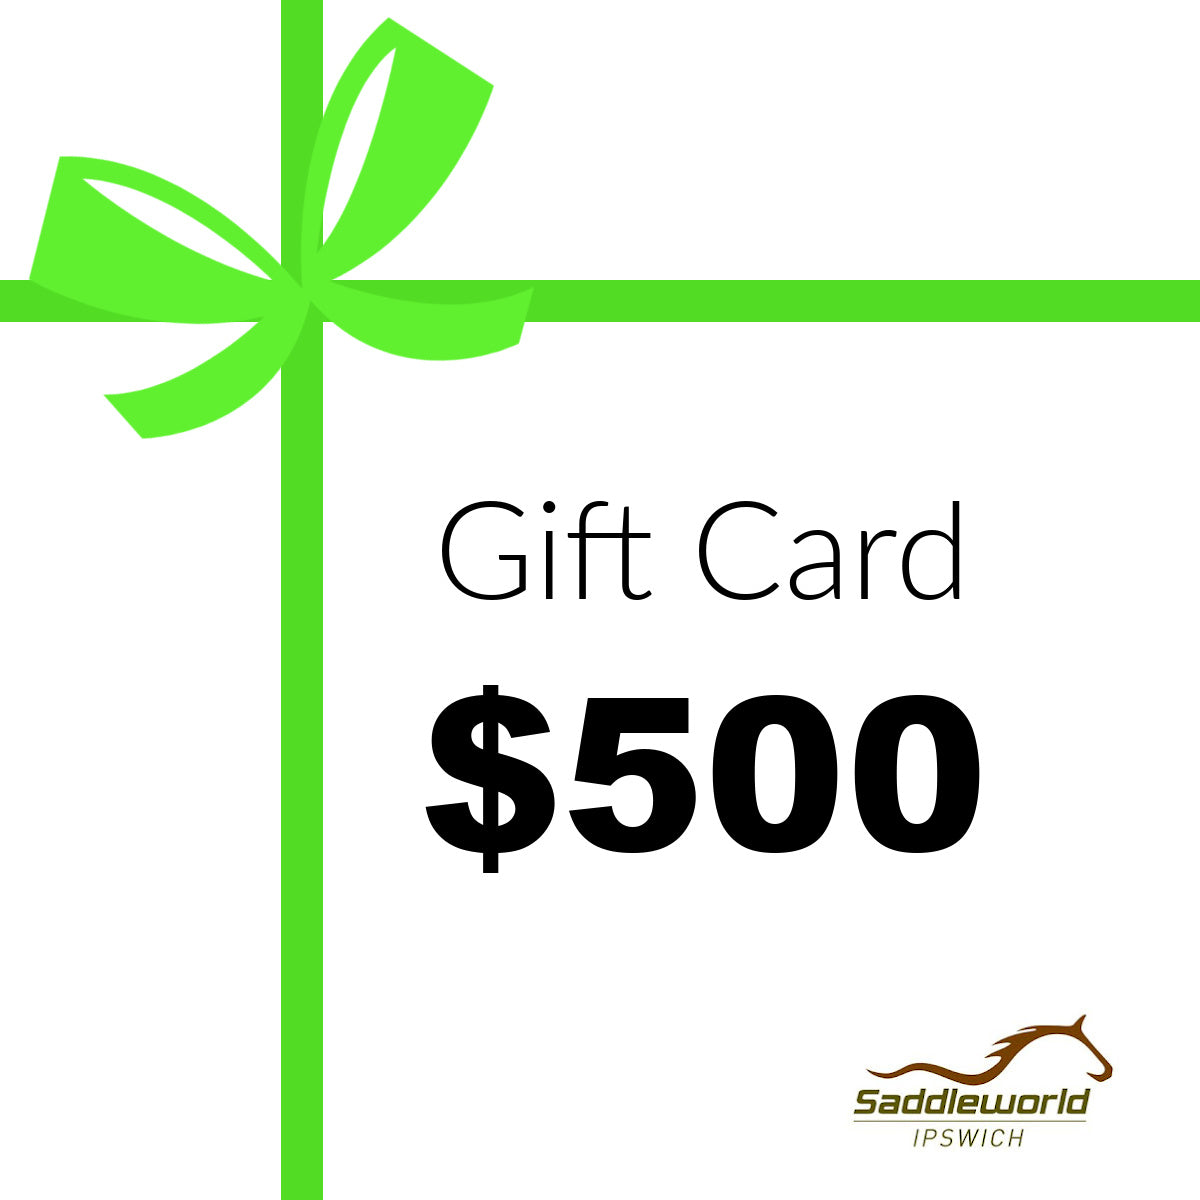 Gift Card Value $500